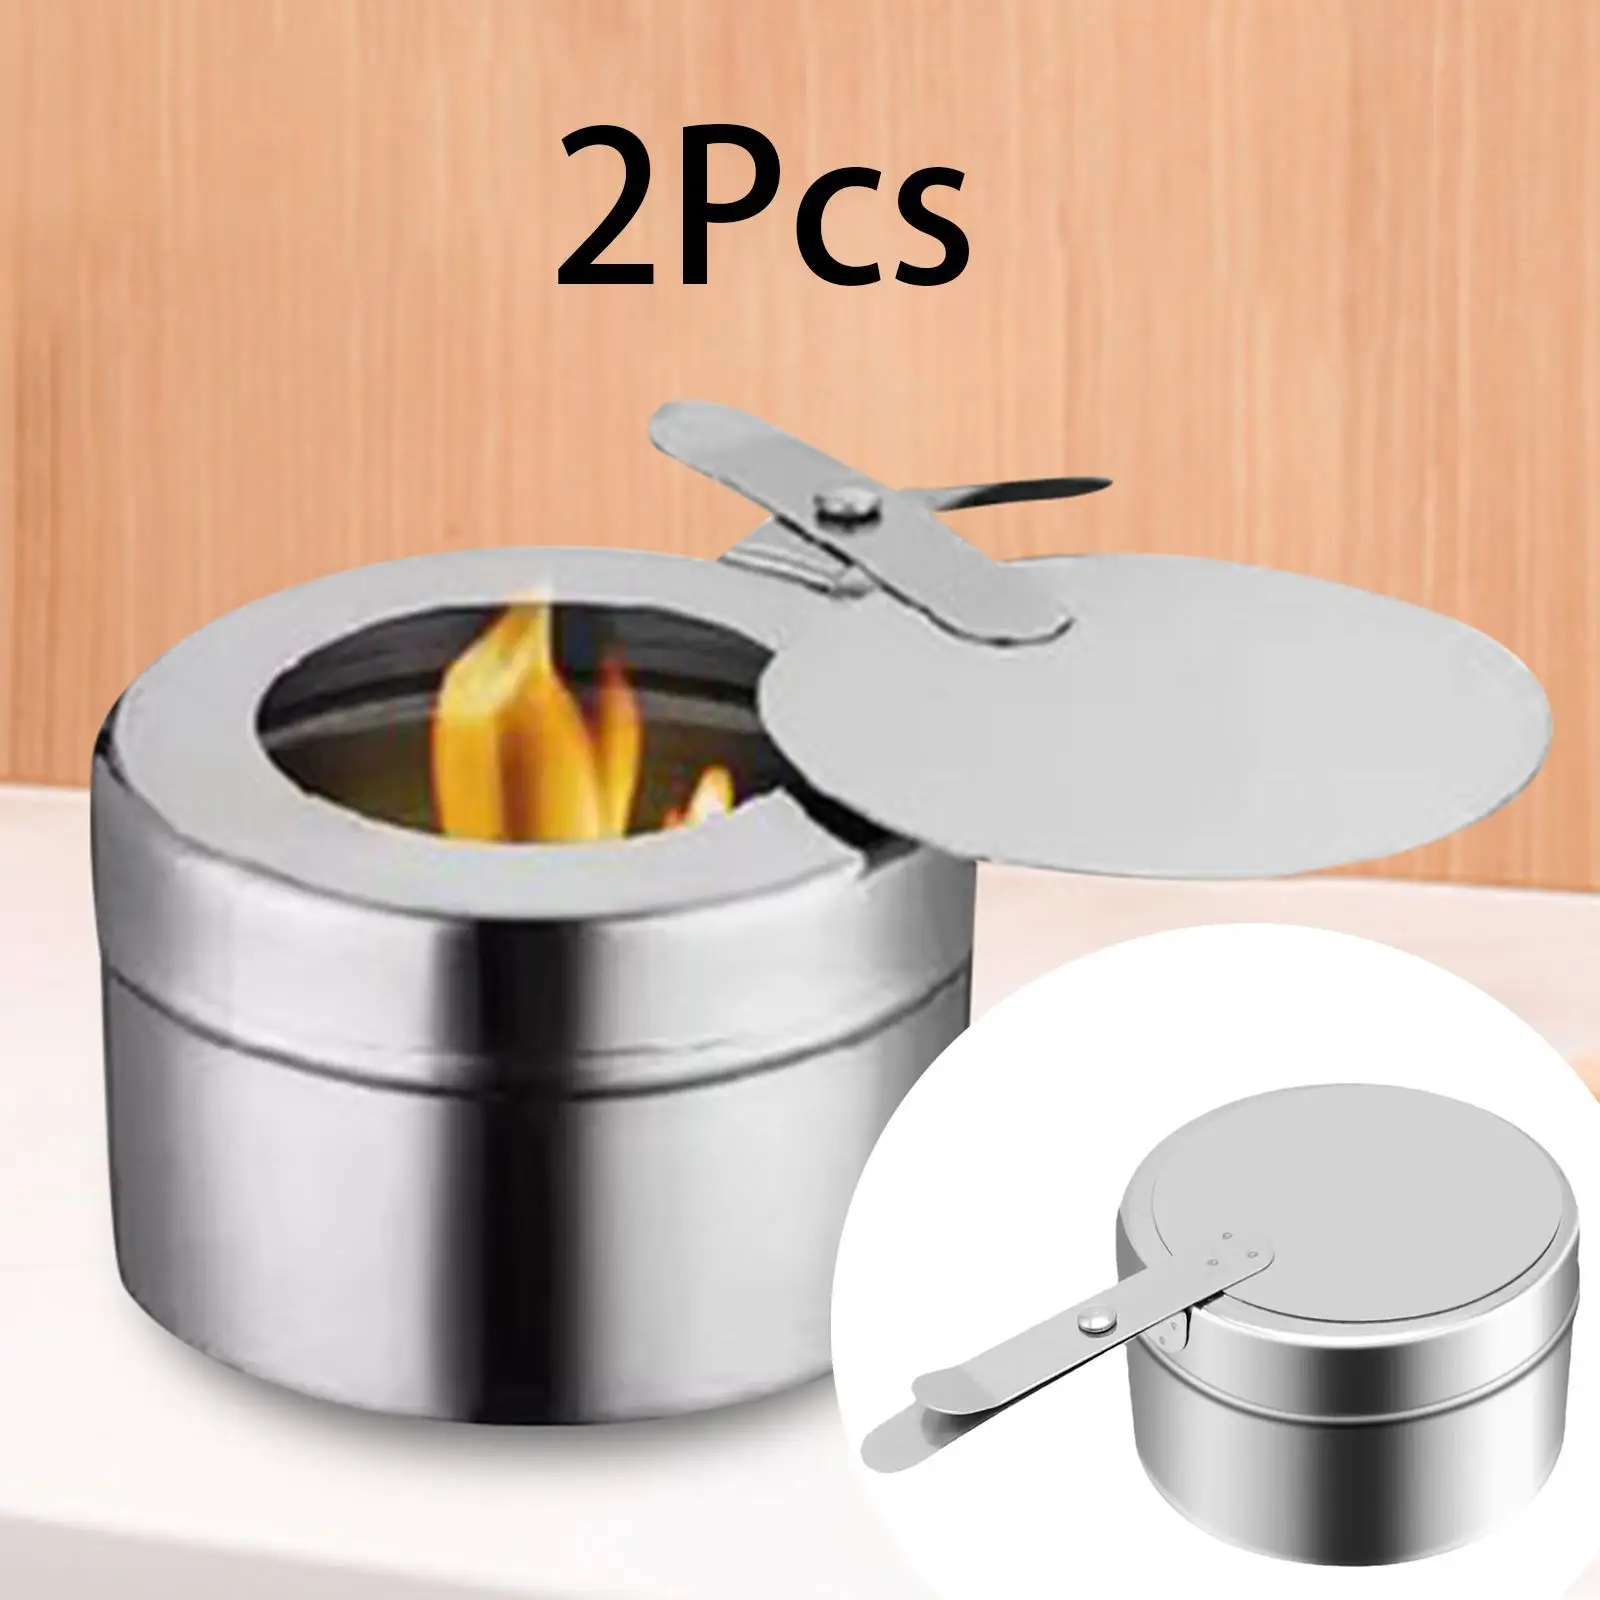 2Pcs Stainless Steel Fuels Holder with Cover, Chafer Wick Fuel Holder, Buffet Warmer Warming Trays for Buffets and Catering